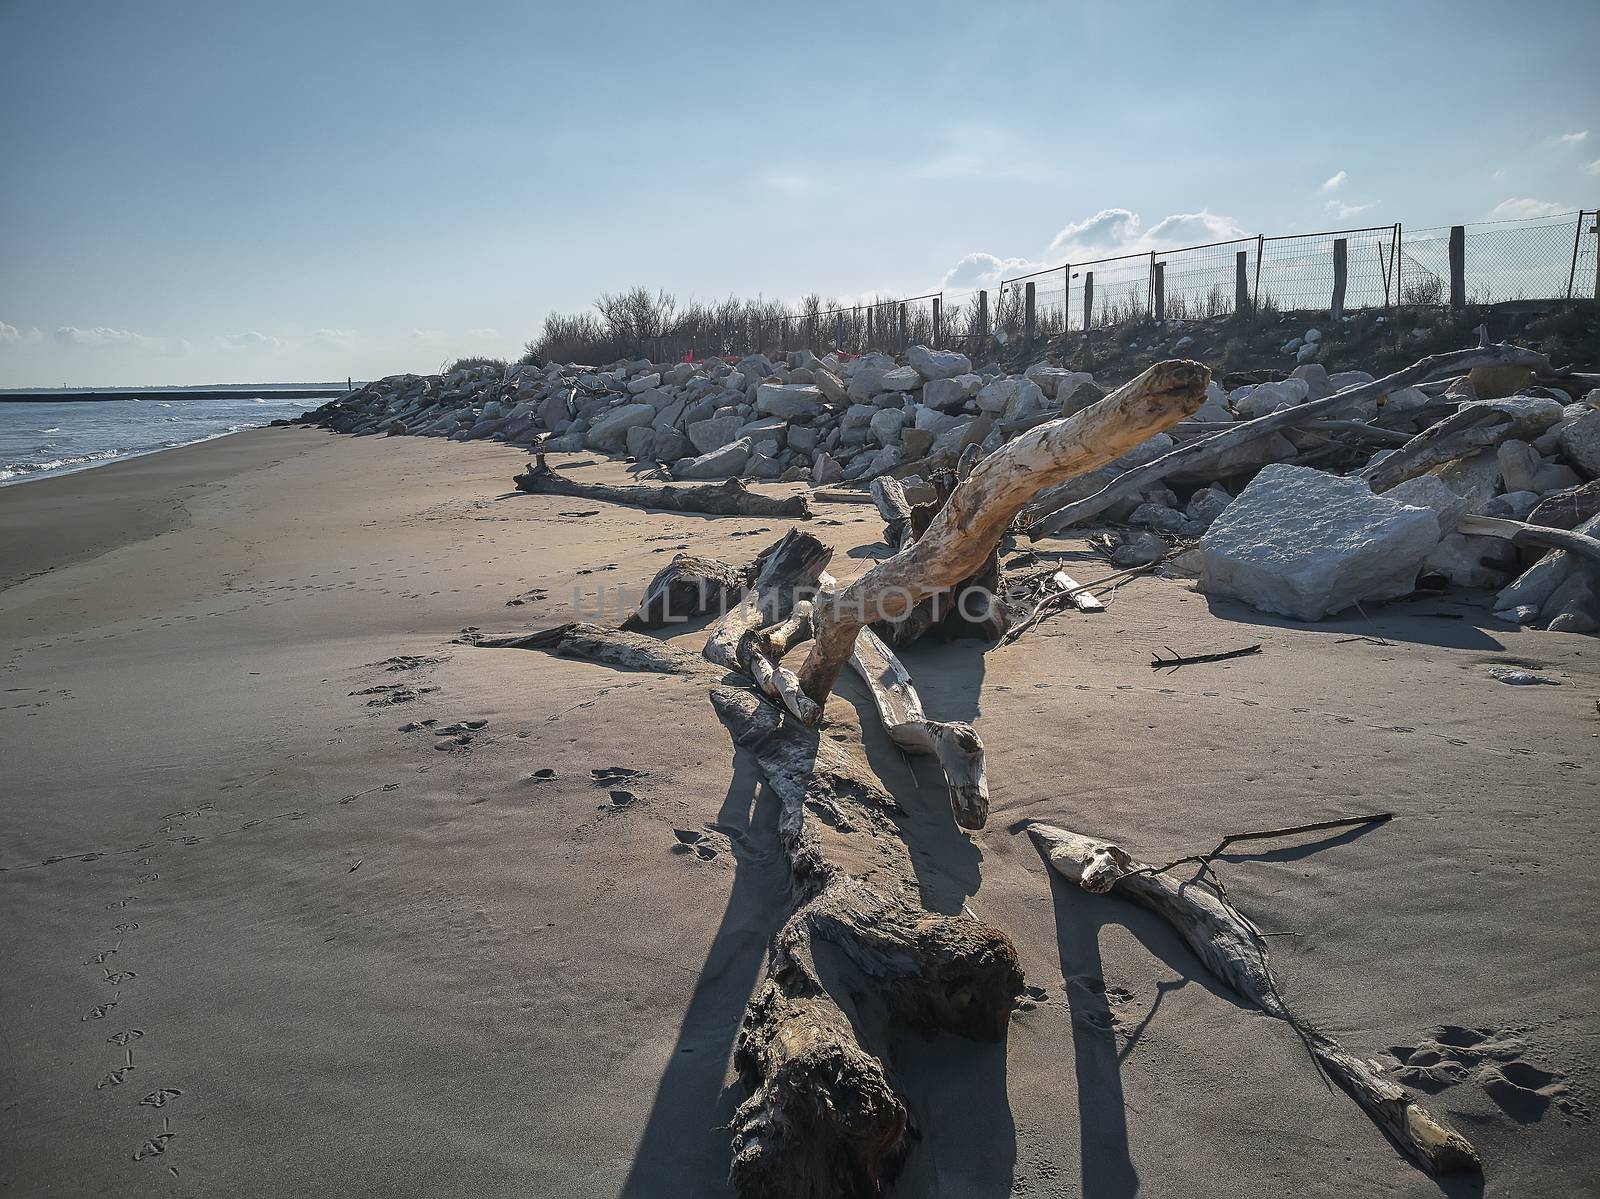 Trunks and pieces of wood transported in the sea shore by the tides in a natural beach of northern Italy.